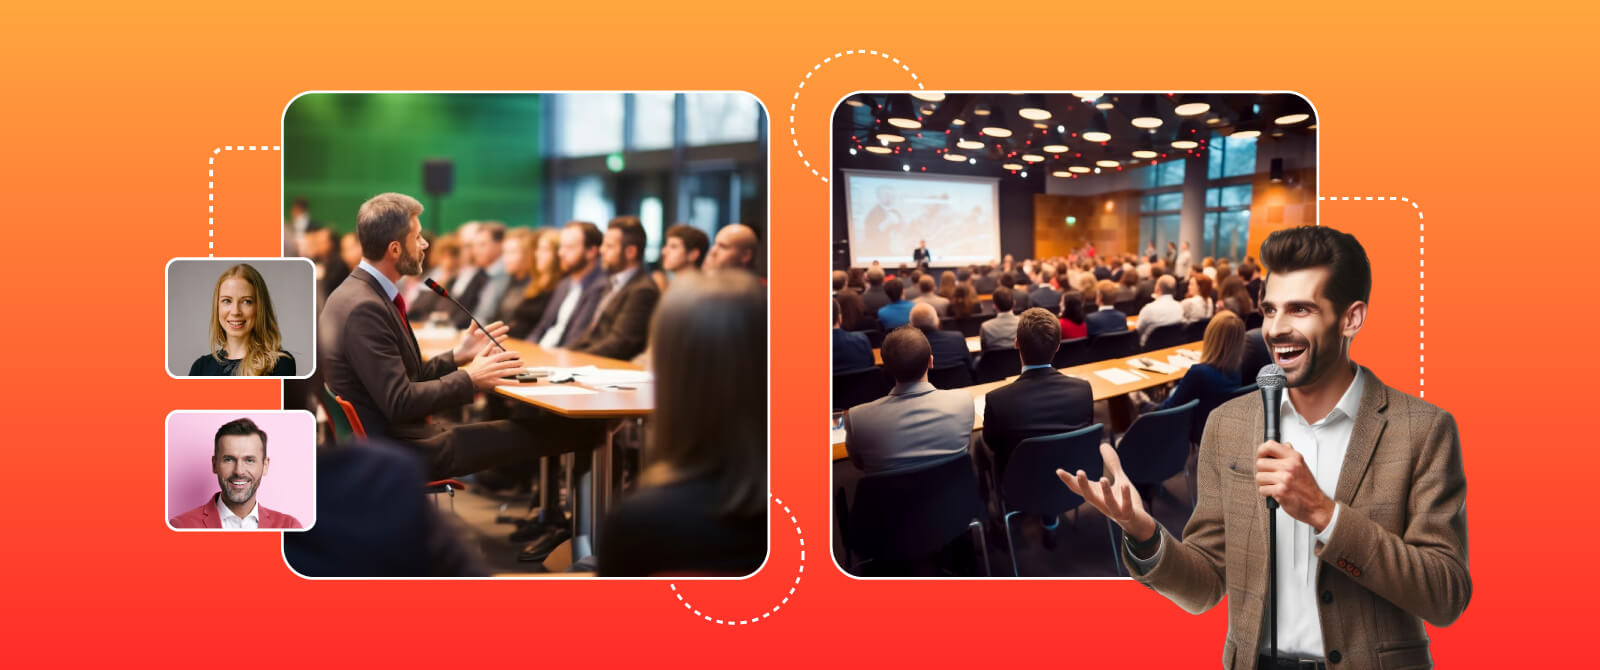 10 Inspiring Conference Themes for Event Organizers and Marketers